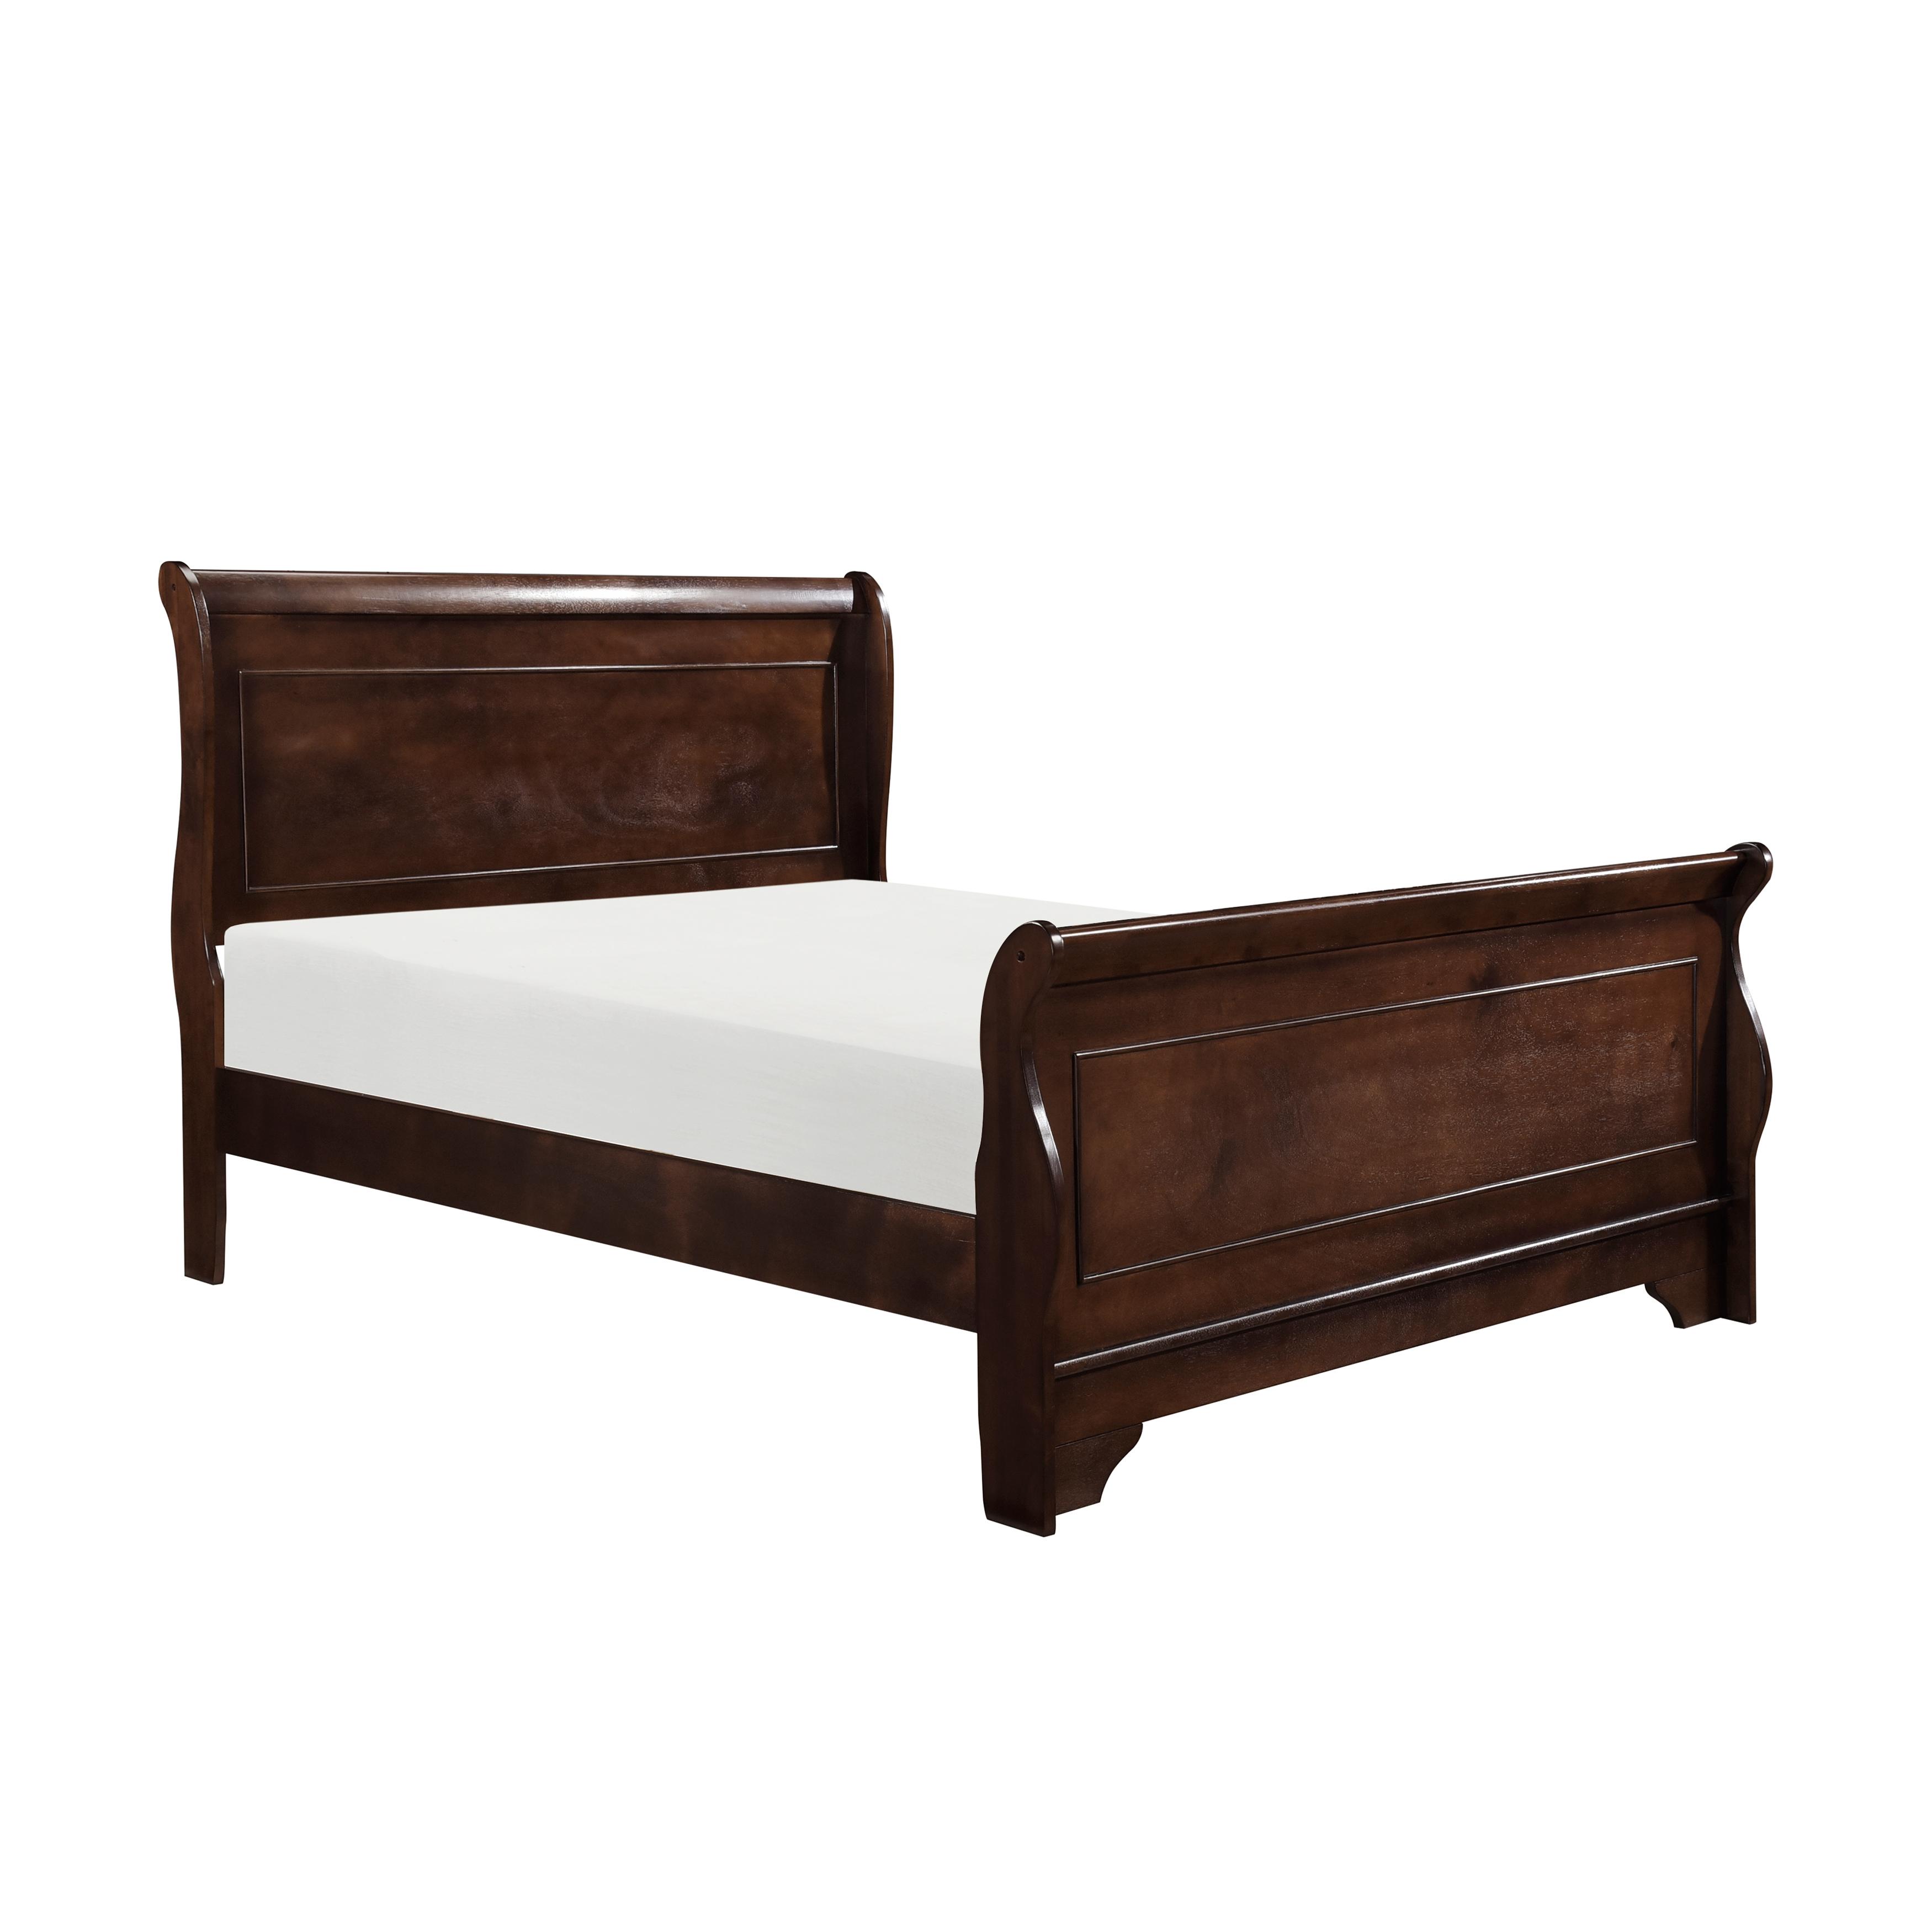 Modern Bed 1856-1* Abbeville 1856-1* in Cherry 